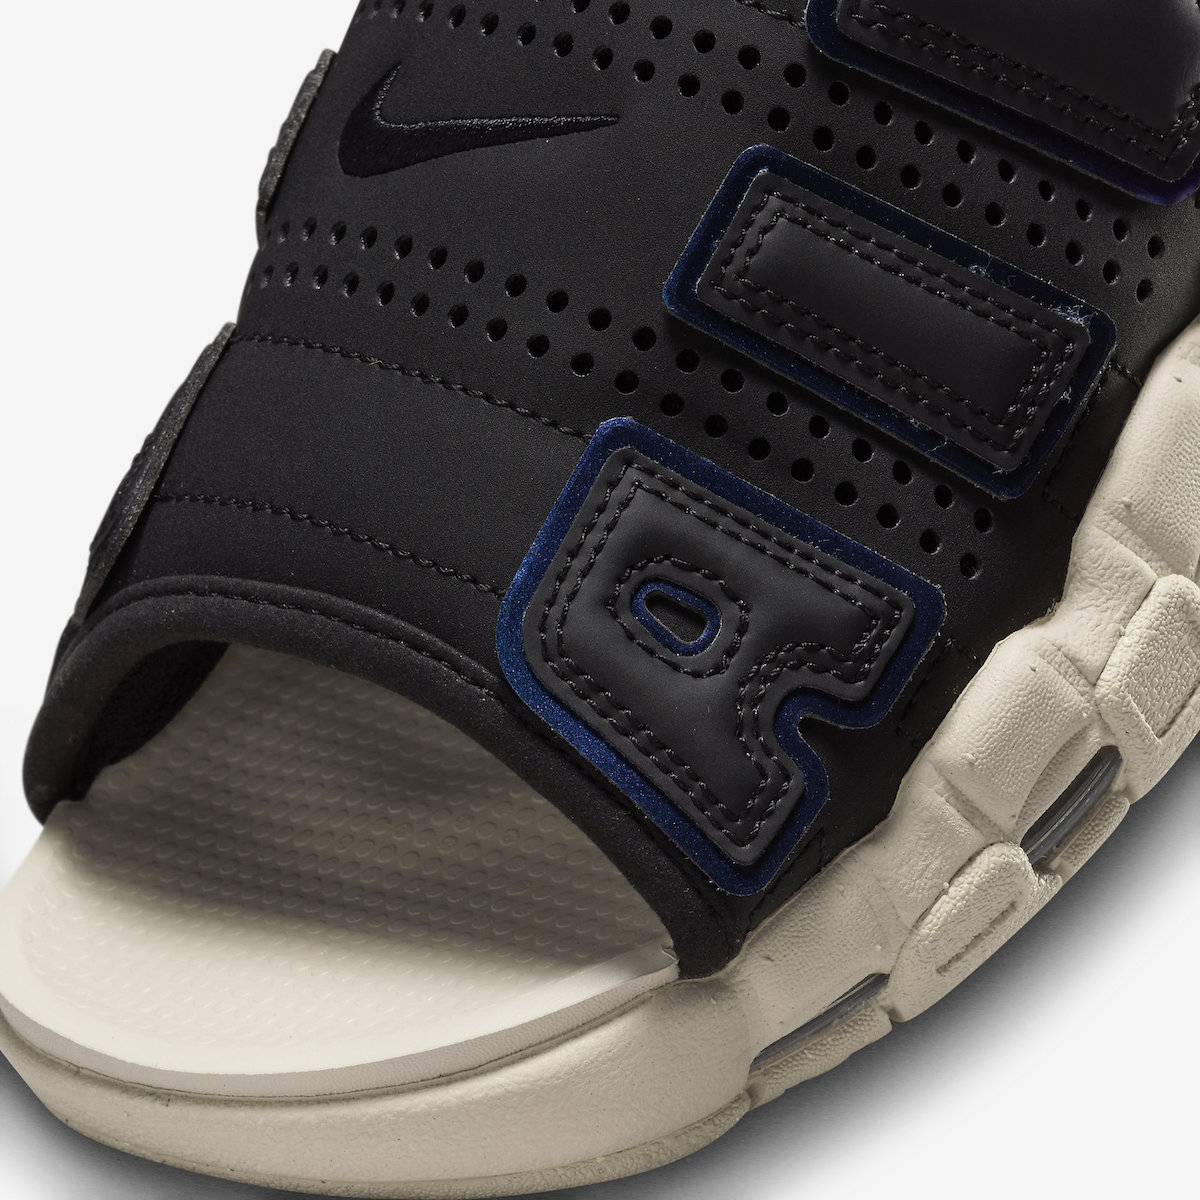 Nike Air More Uptempo Slide FB7799-001 Release Date | SBD